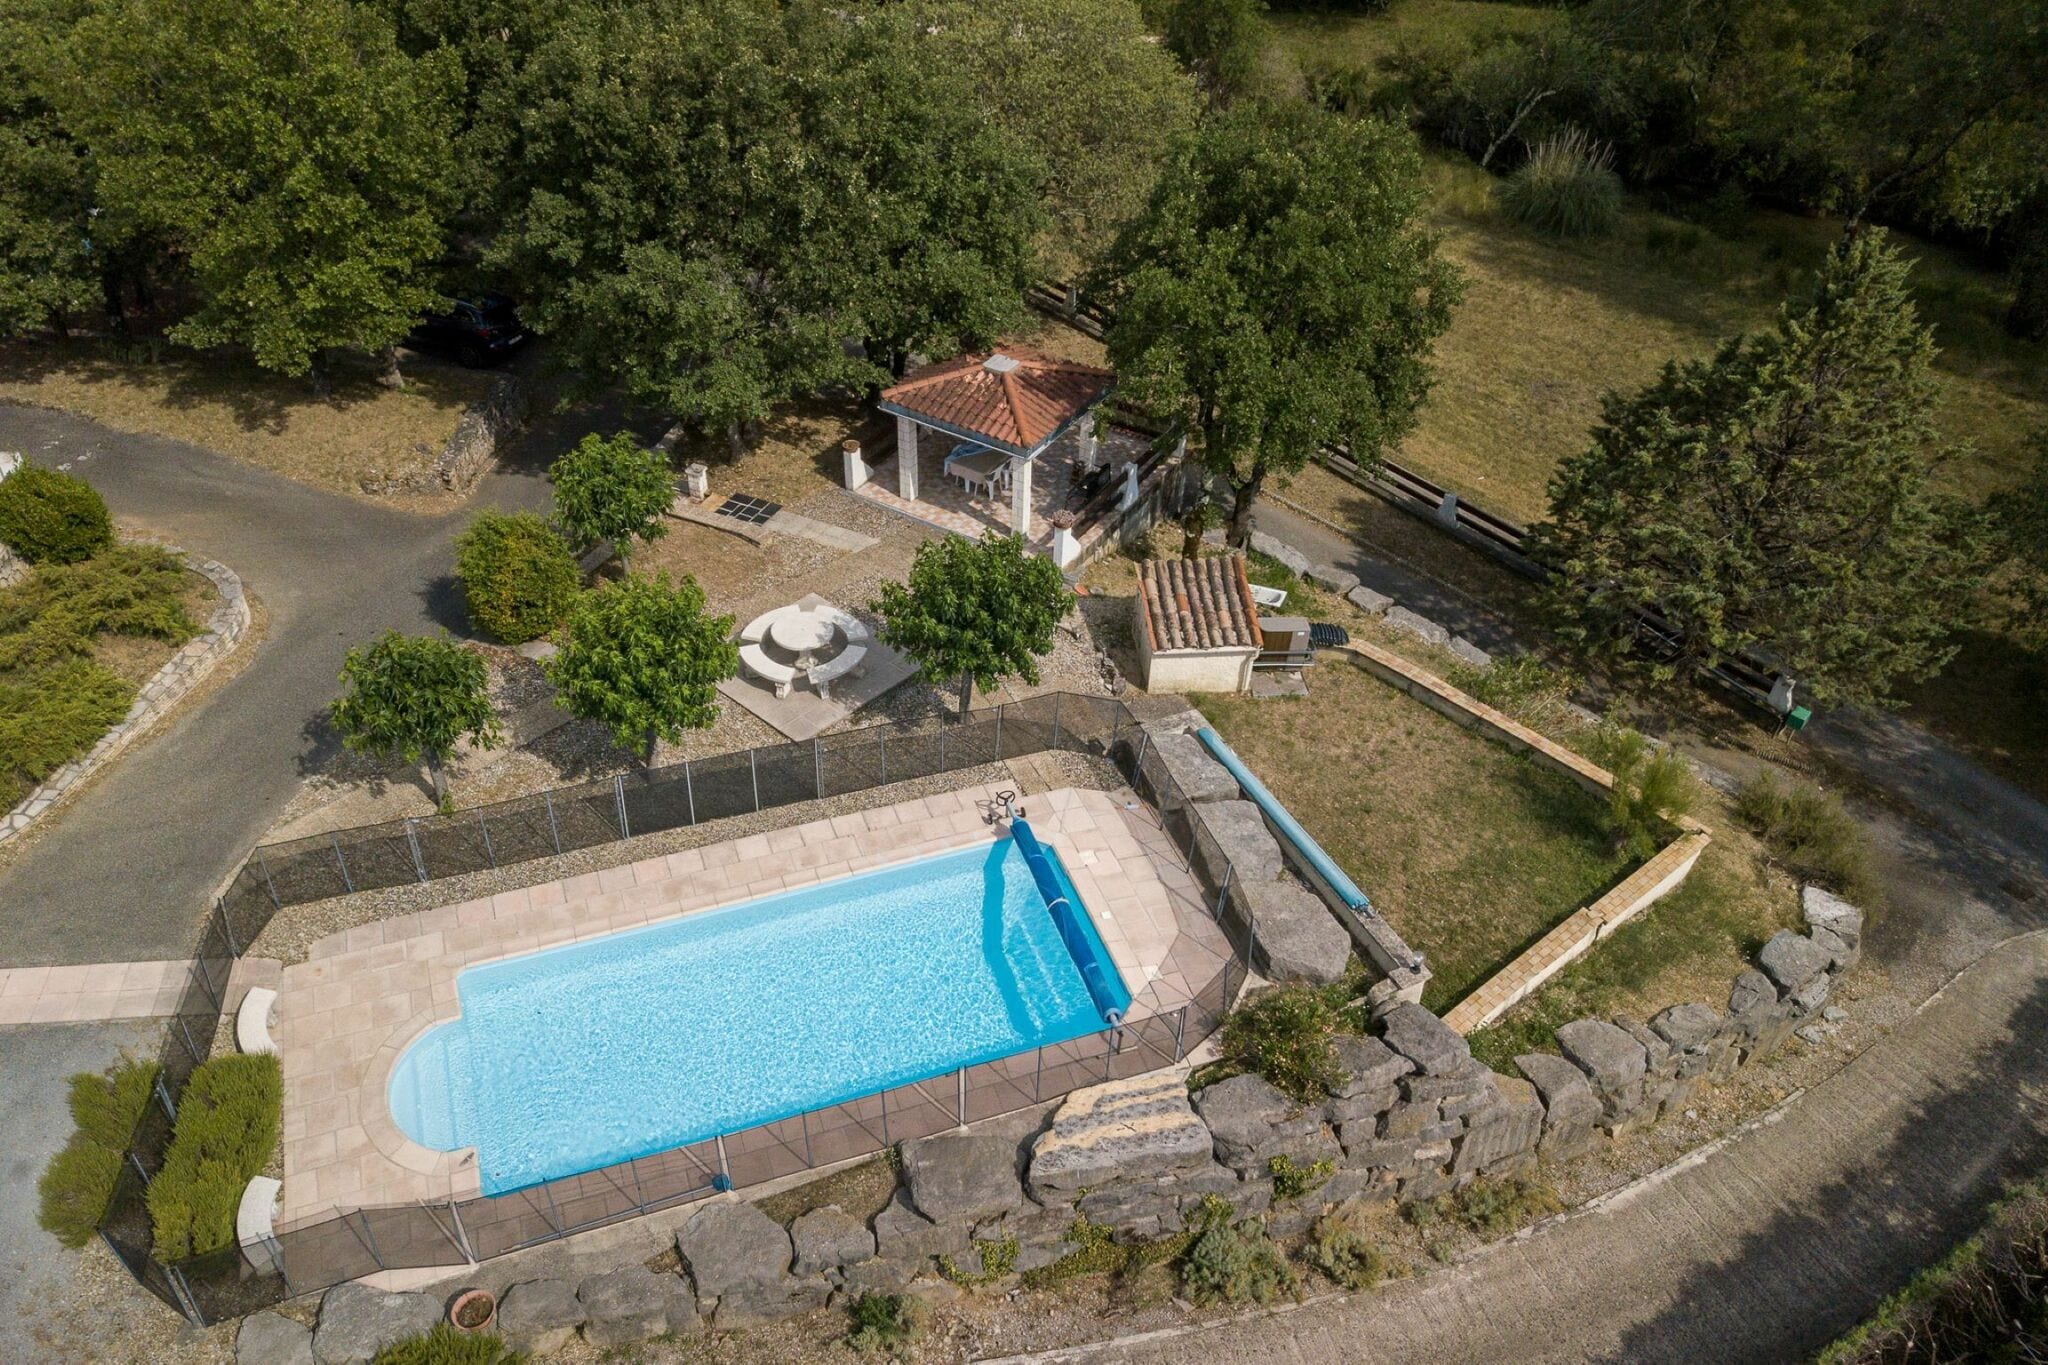 Cottage in Uzer with Pool, Terrace, Garden, Deckchairs